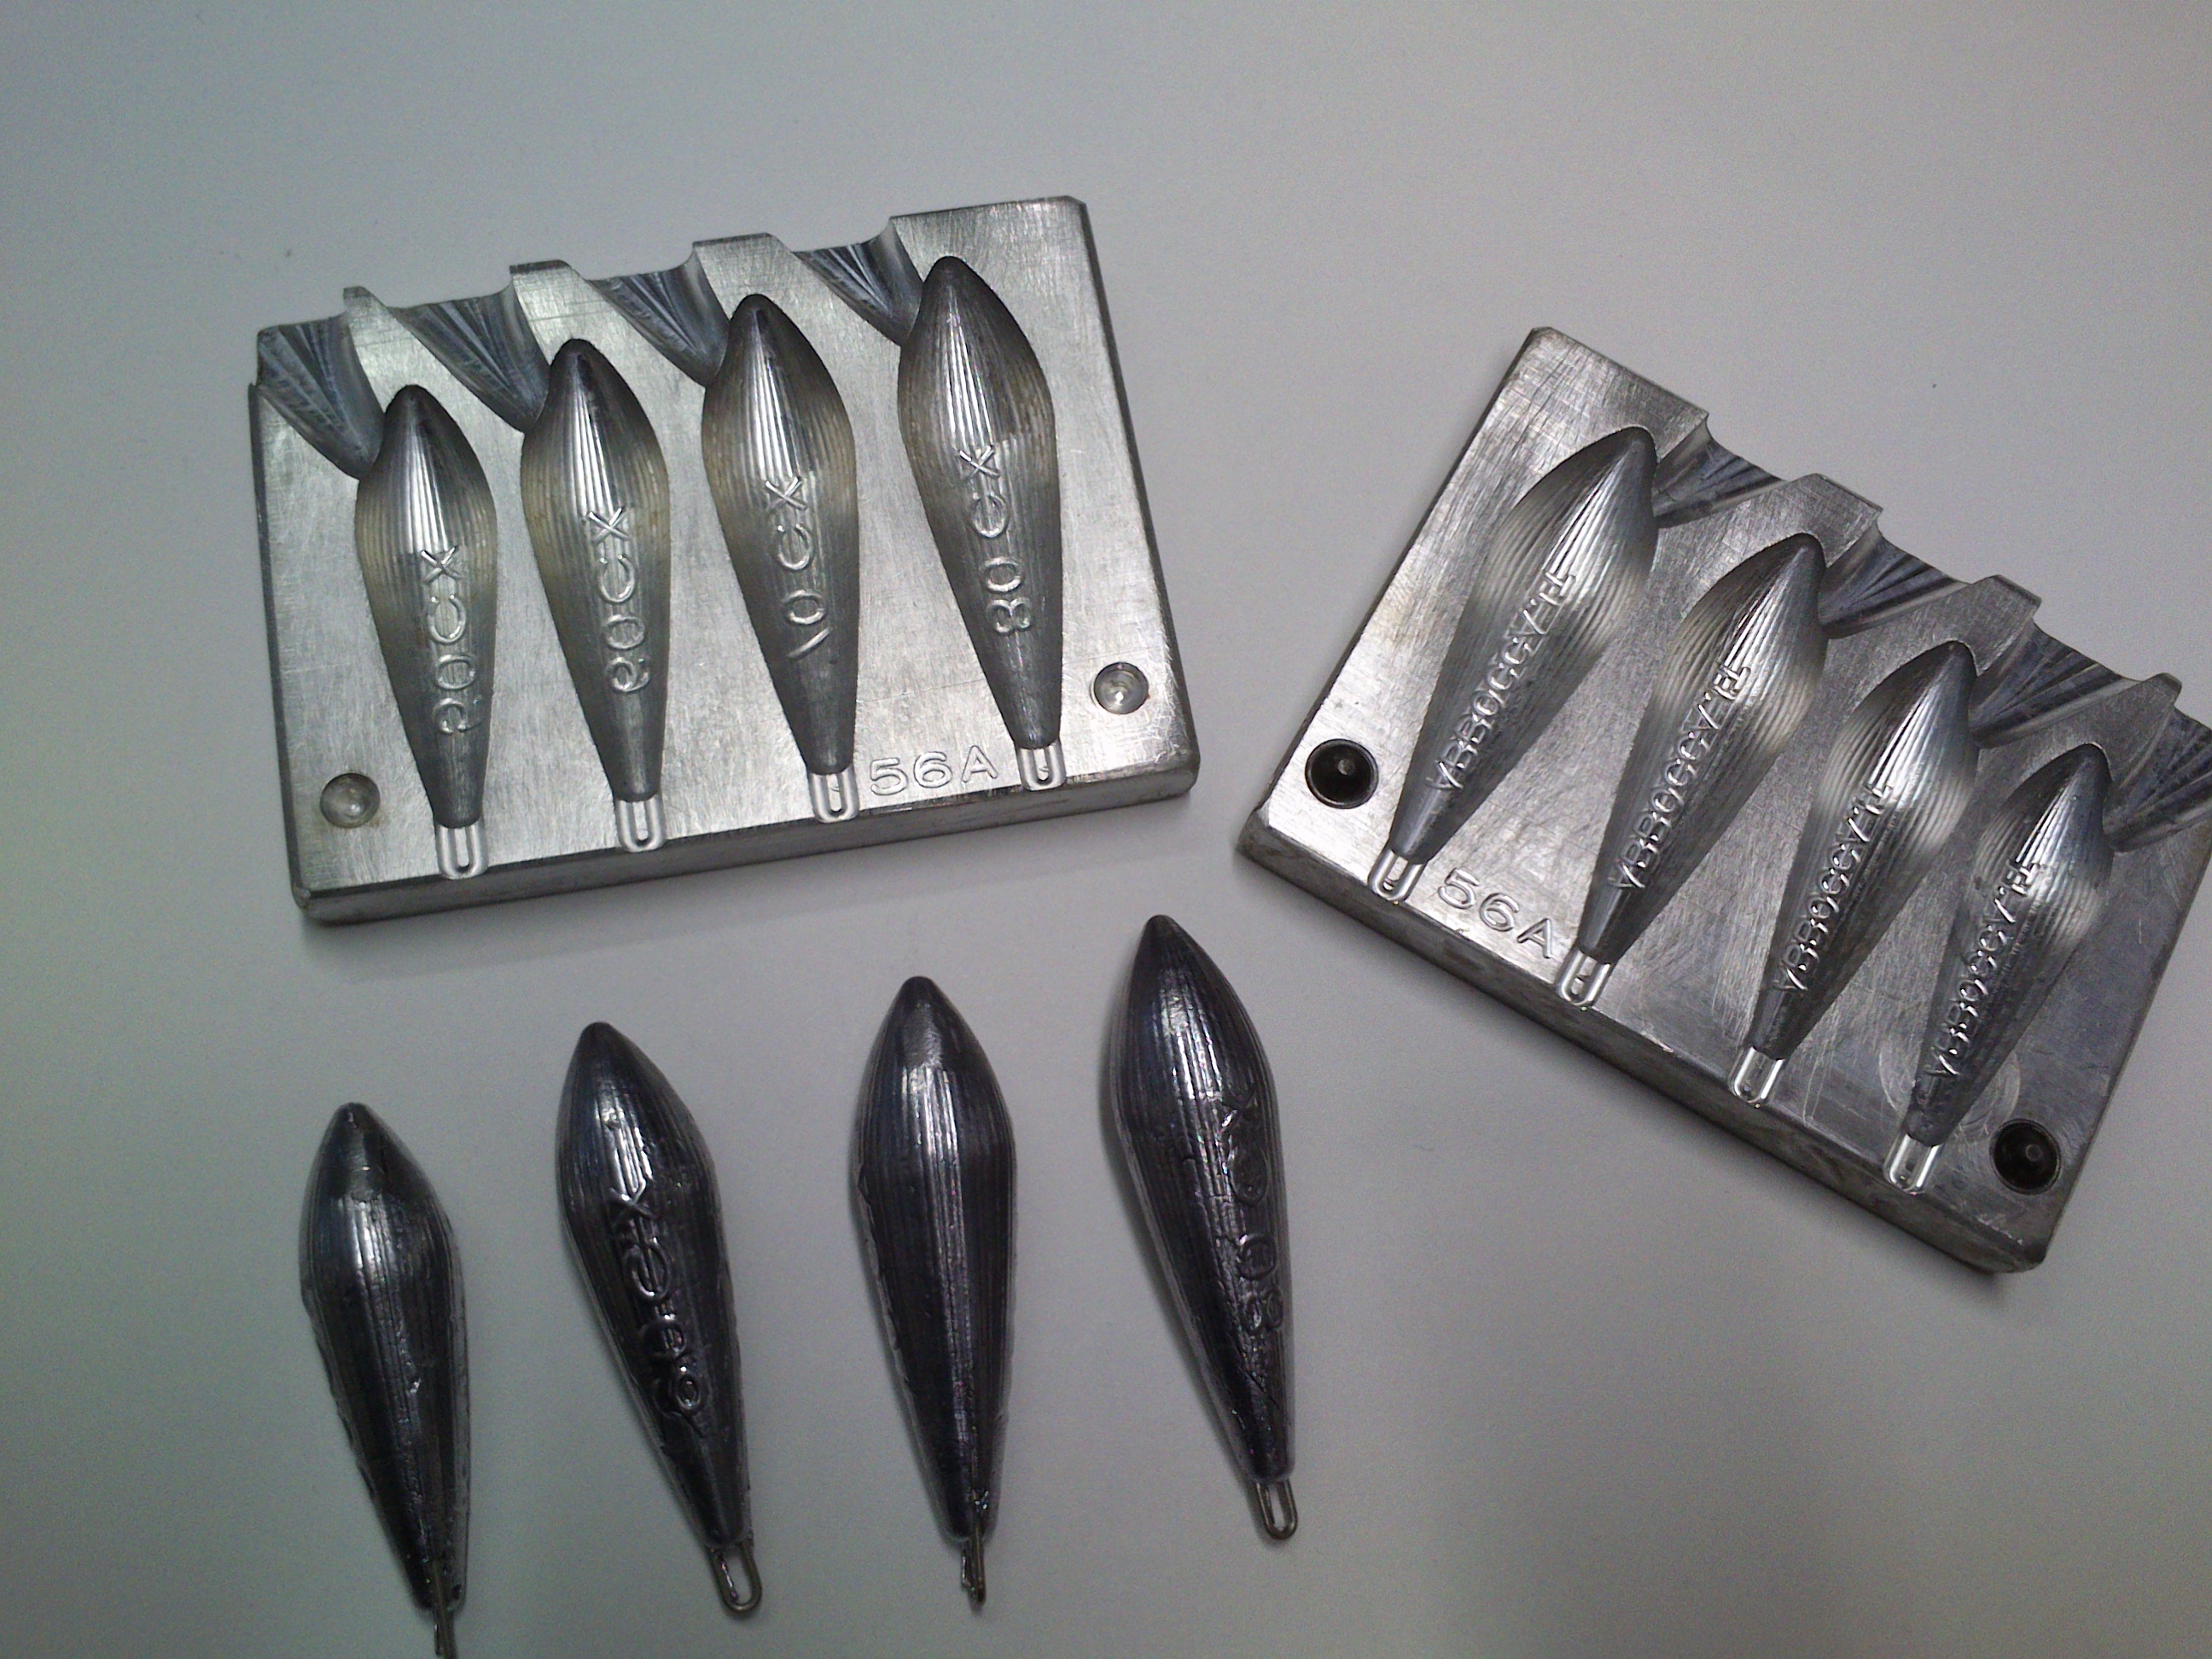 Molds leads for Big Game : !, The originals  accessories for surfcasting